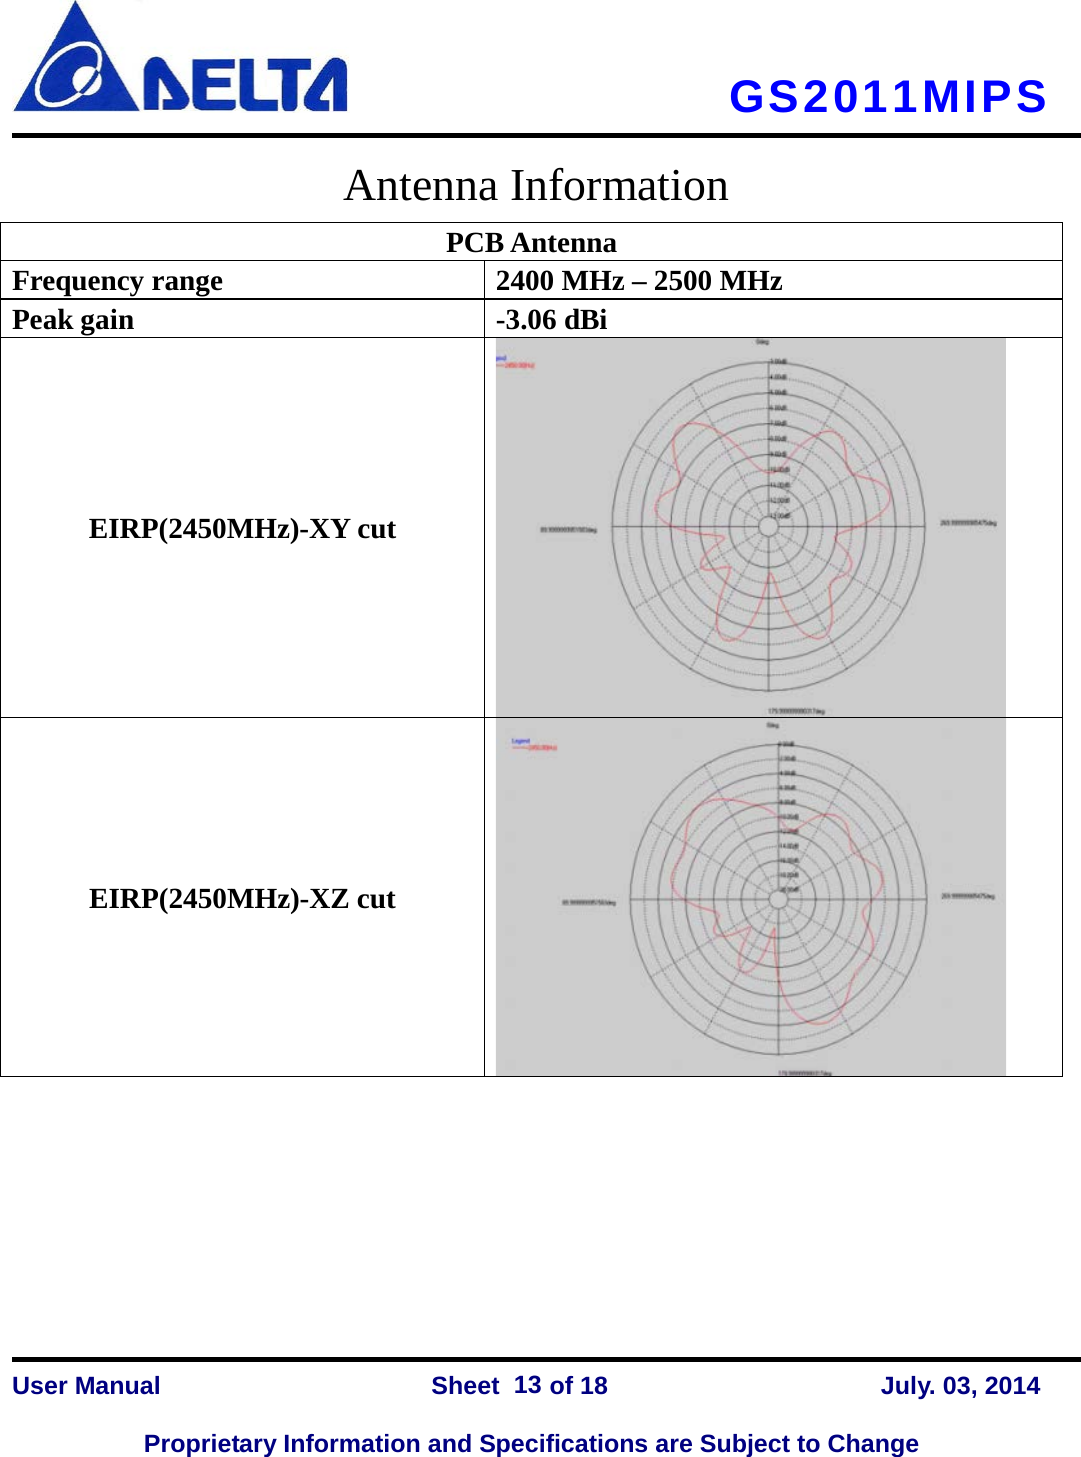     GS2011MIPS  Antenna Information PCB Antenna Frequency range     2400 MHz – 2500 MHz Peak gain -3.06 dBi EIRP(2450MHz)-XY cut  EIRP(2450MHz)-XZ cut    User Manual                Sheet    of 18      July. 03, 2014  Proprietary Information and Specifications are Subject to Change 13 